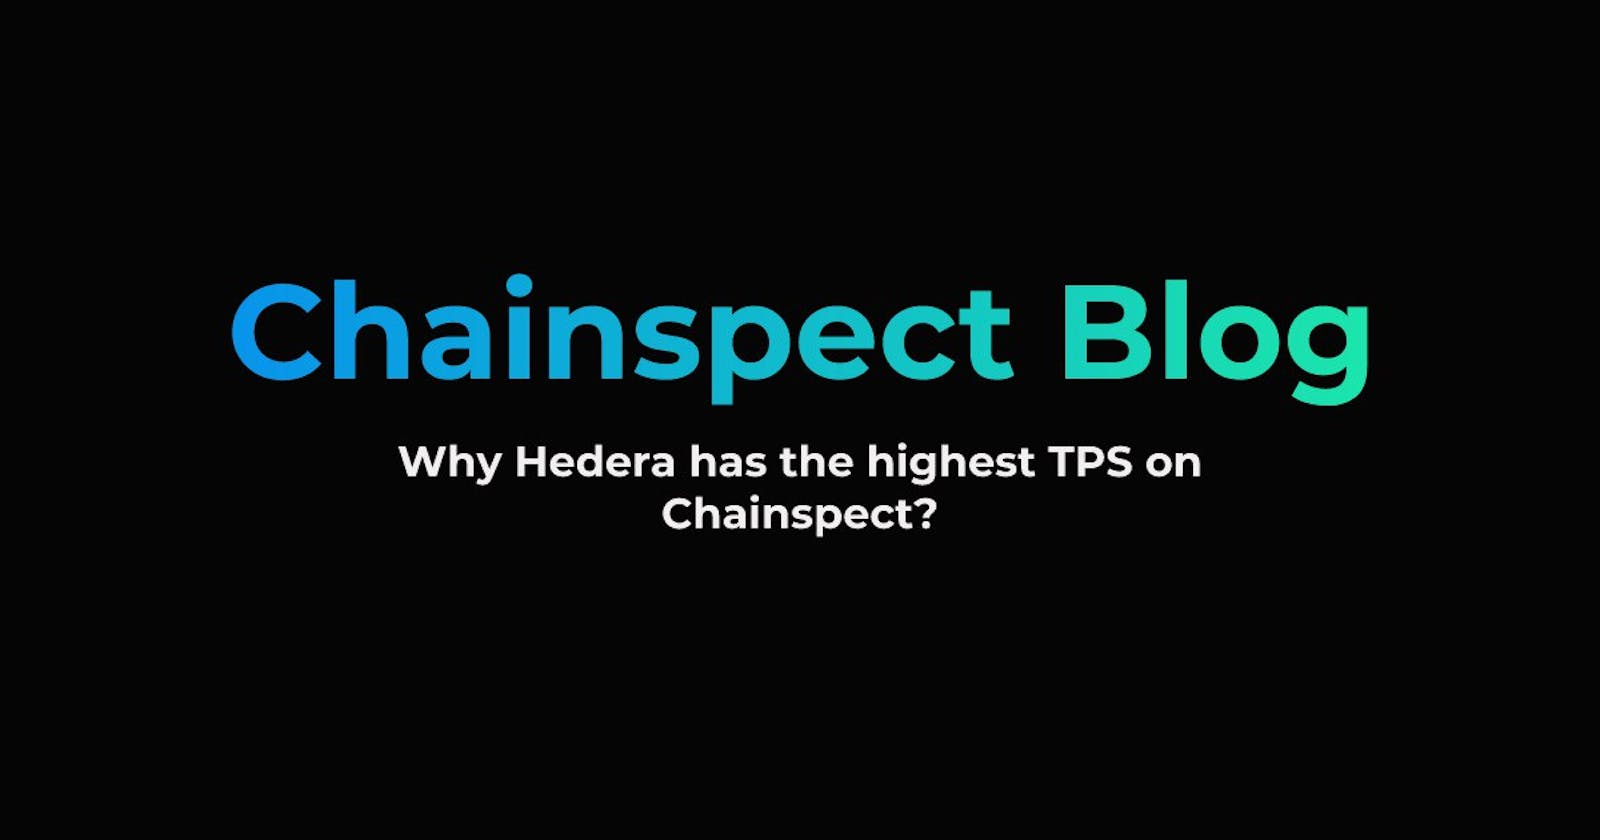 Why Hedera has the highest TPS on Chainspect?